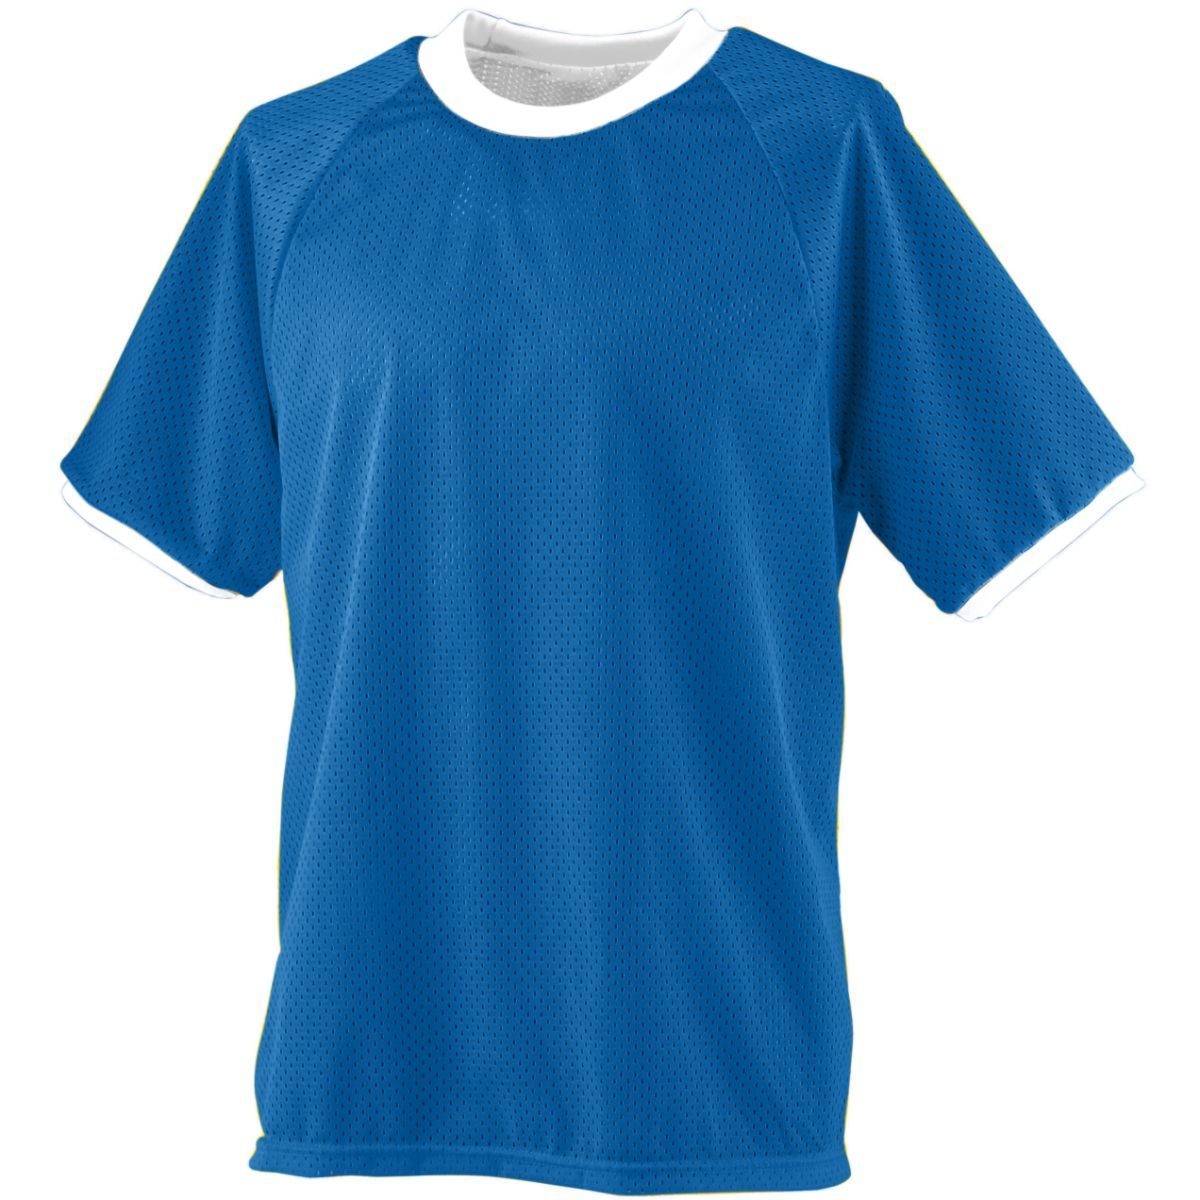 Augusta Sportswear Youth Reversible Practice Jersey in Royal/White  -Part of the Youth, Youth-Jersey, Augusta-Products, Soccer, Shirts, All-Sports-1 product lines at KanaleyCreations.com